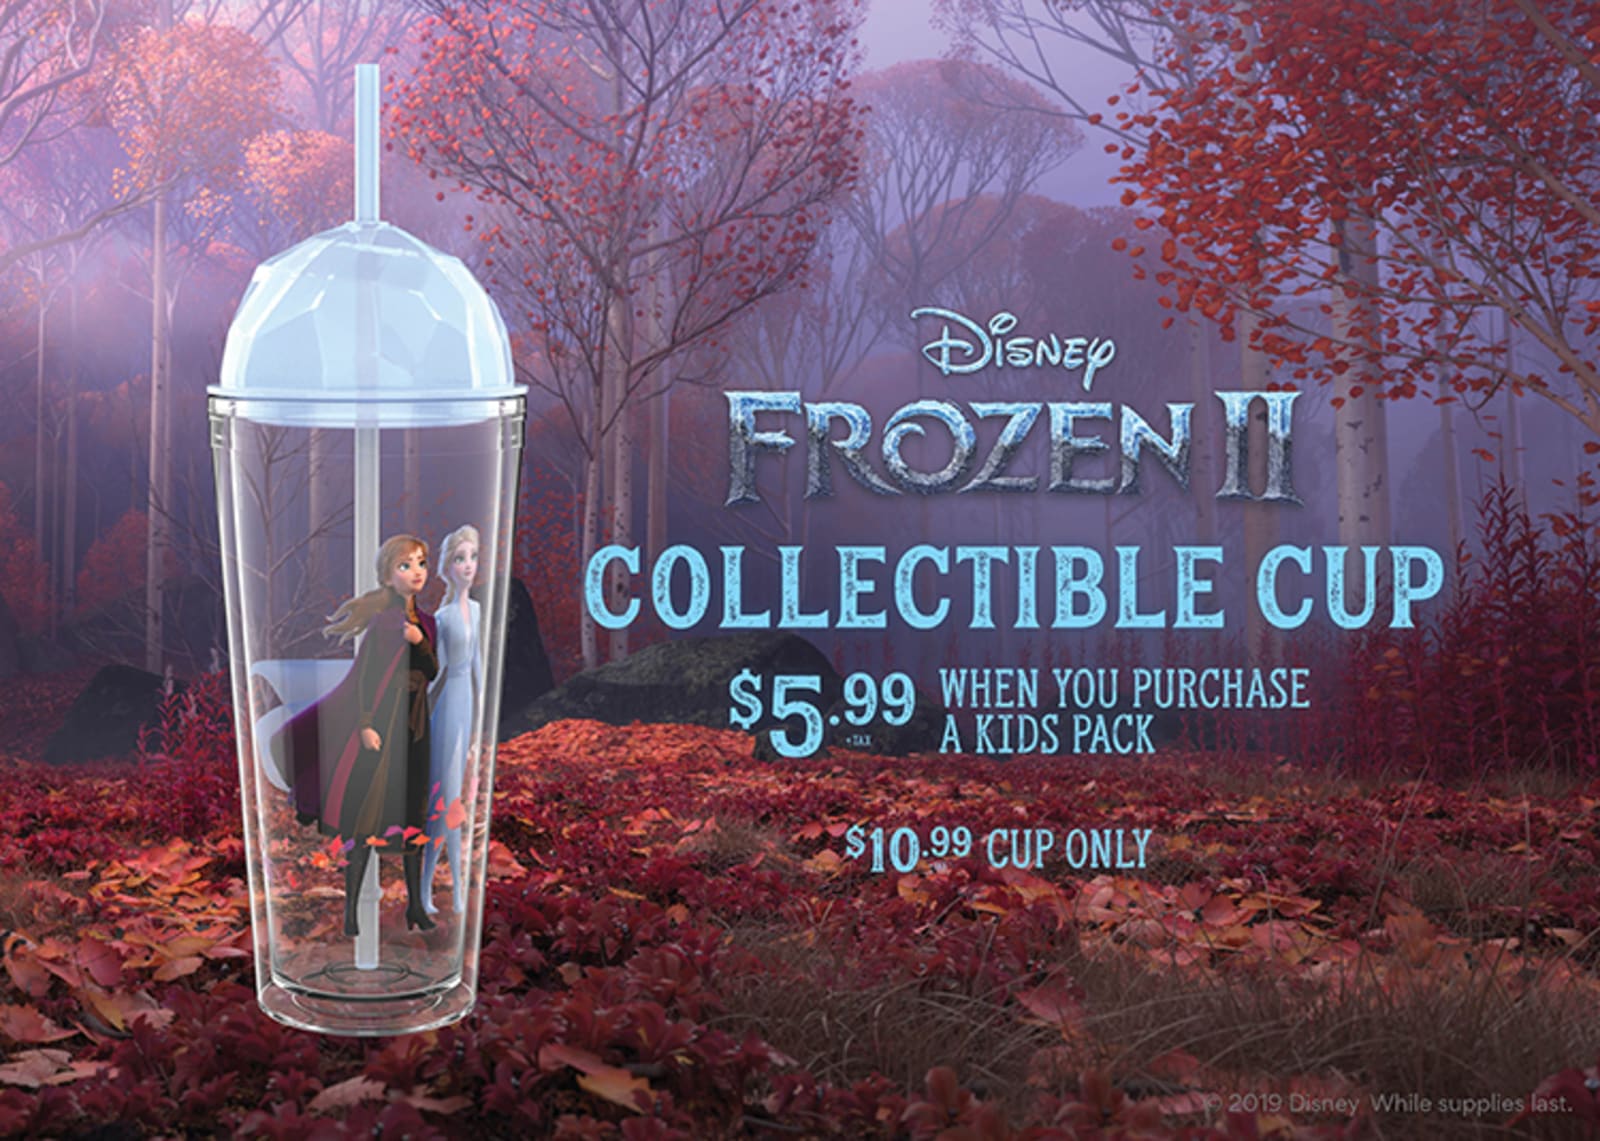 https://amc-theatres-res.cloudinary.com/image/upload/f_auto,fl_lossy,q_auto,w_1600/v1573846409/amc-cdn/general/offers/frozen-2-cup/FLM_1851_Frozen2_Cup_Newsletter_750x535.jpg